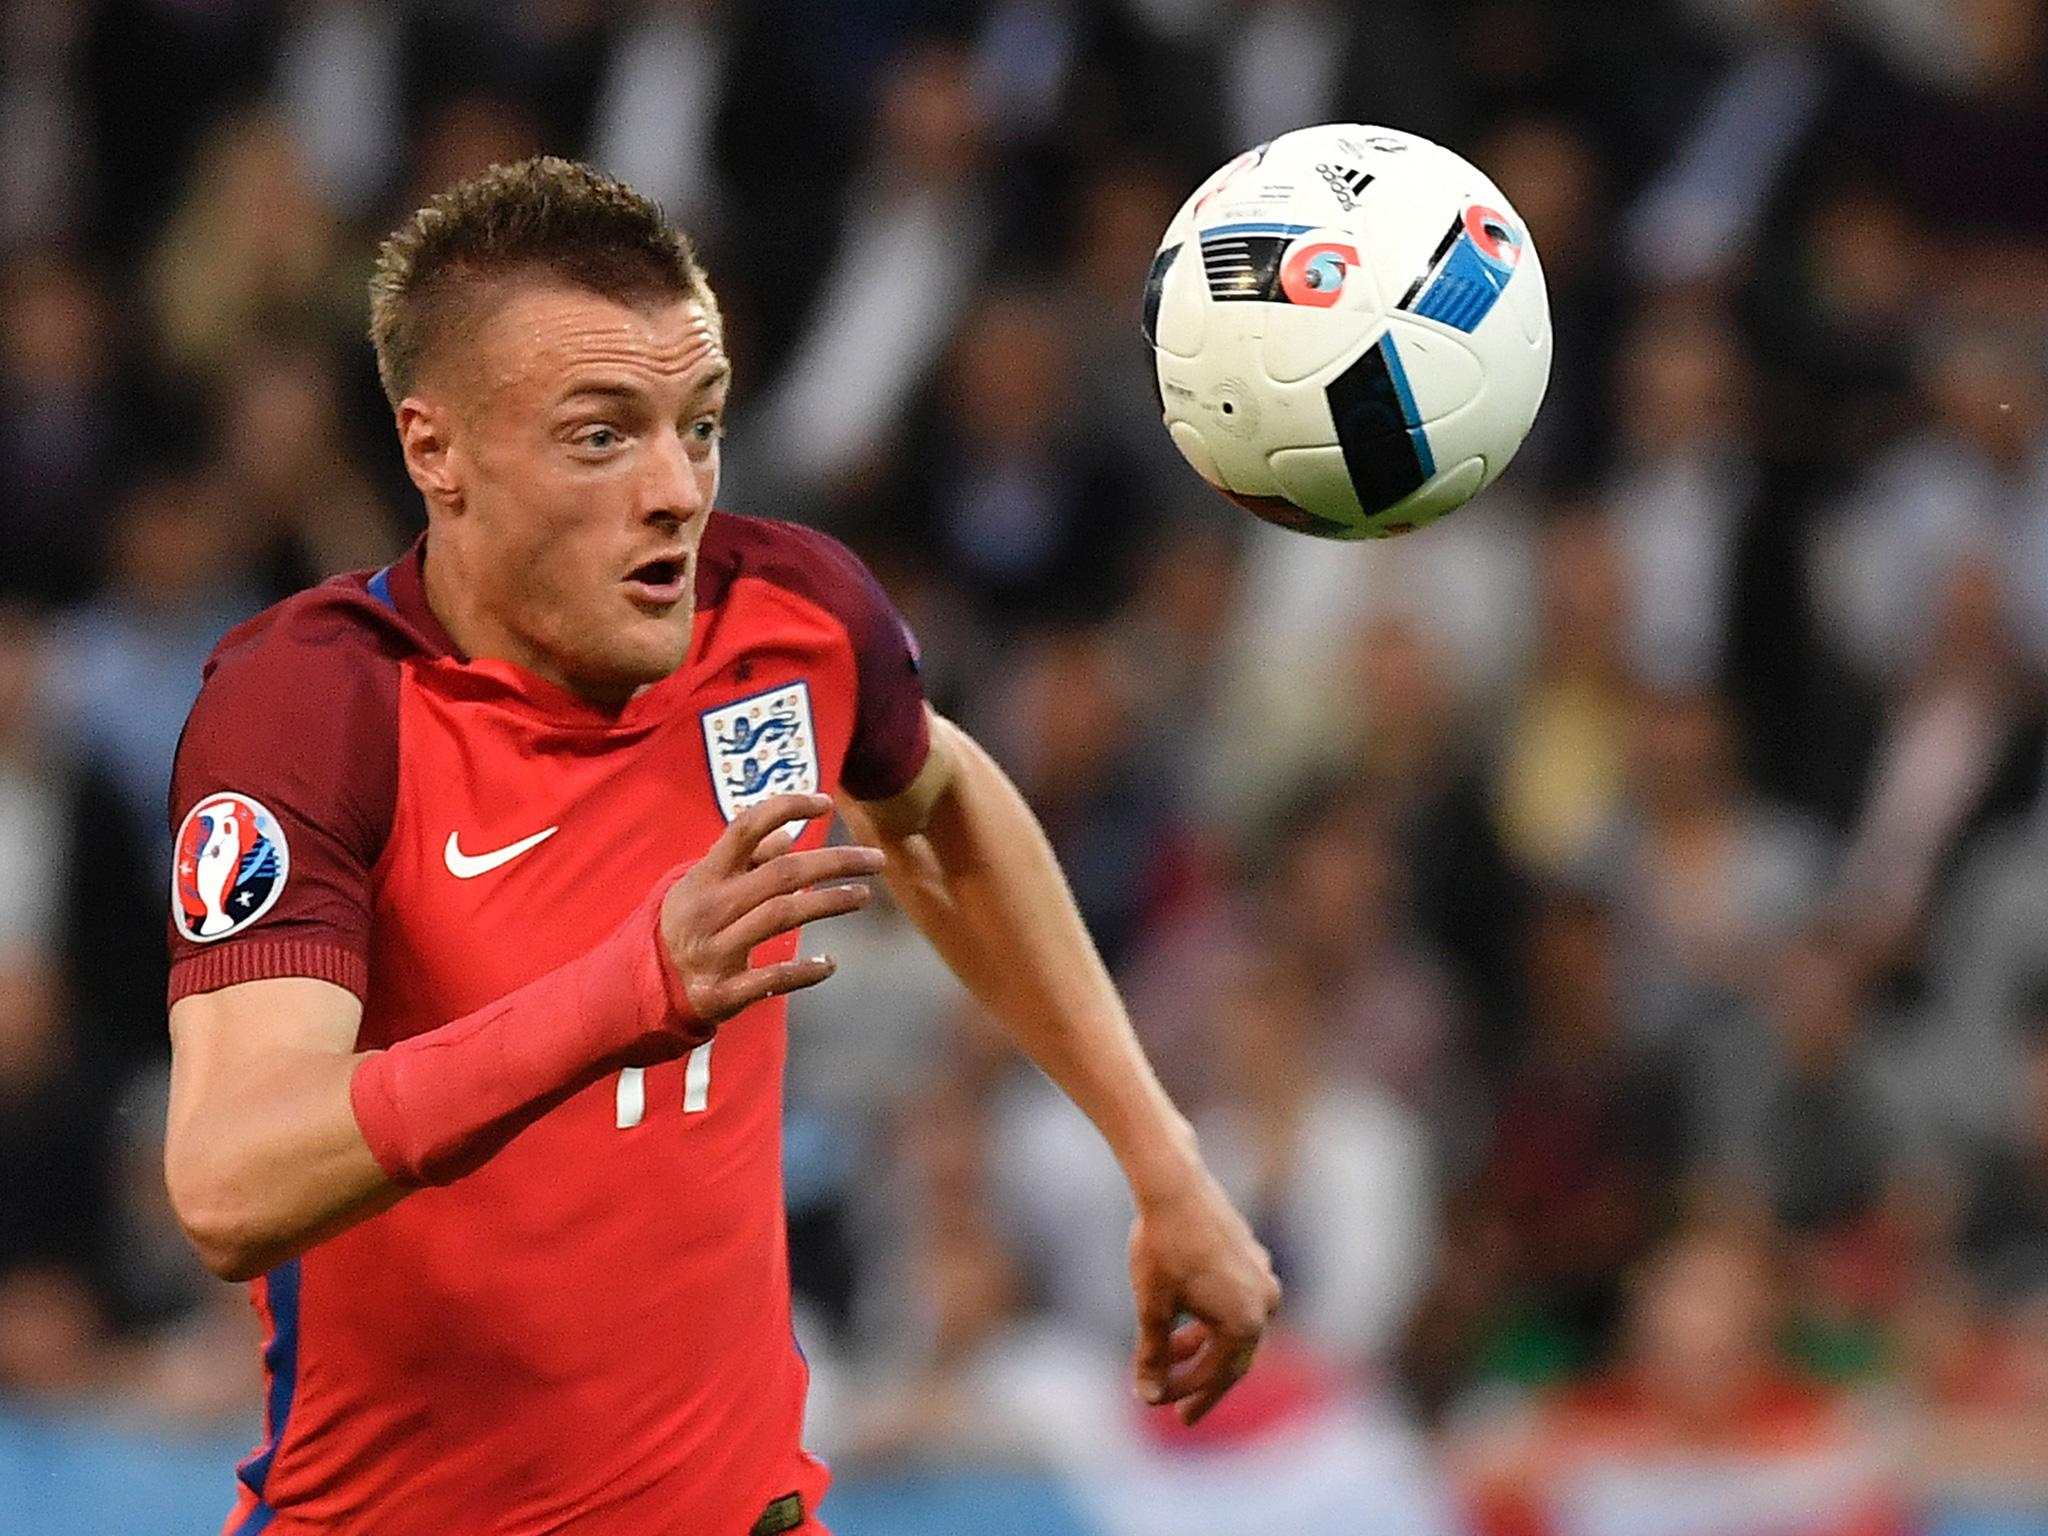 Vardy chases the ball down during England's clash against Slovakia